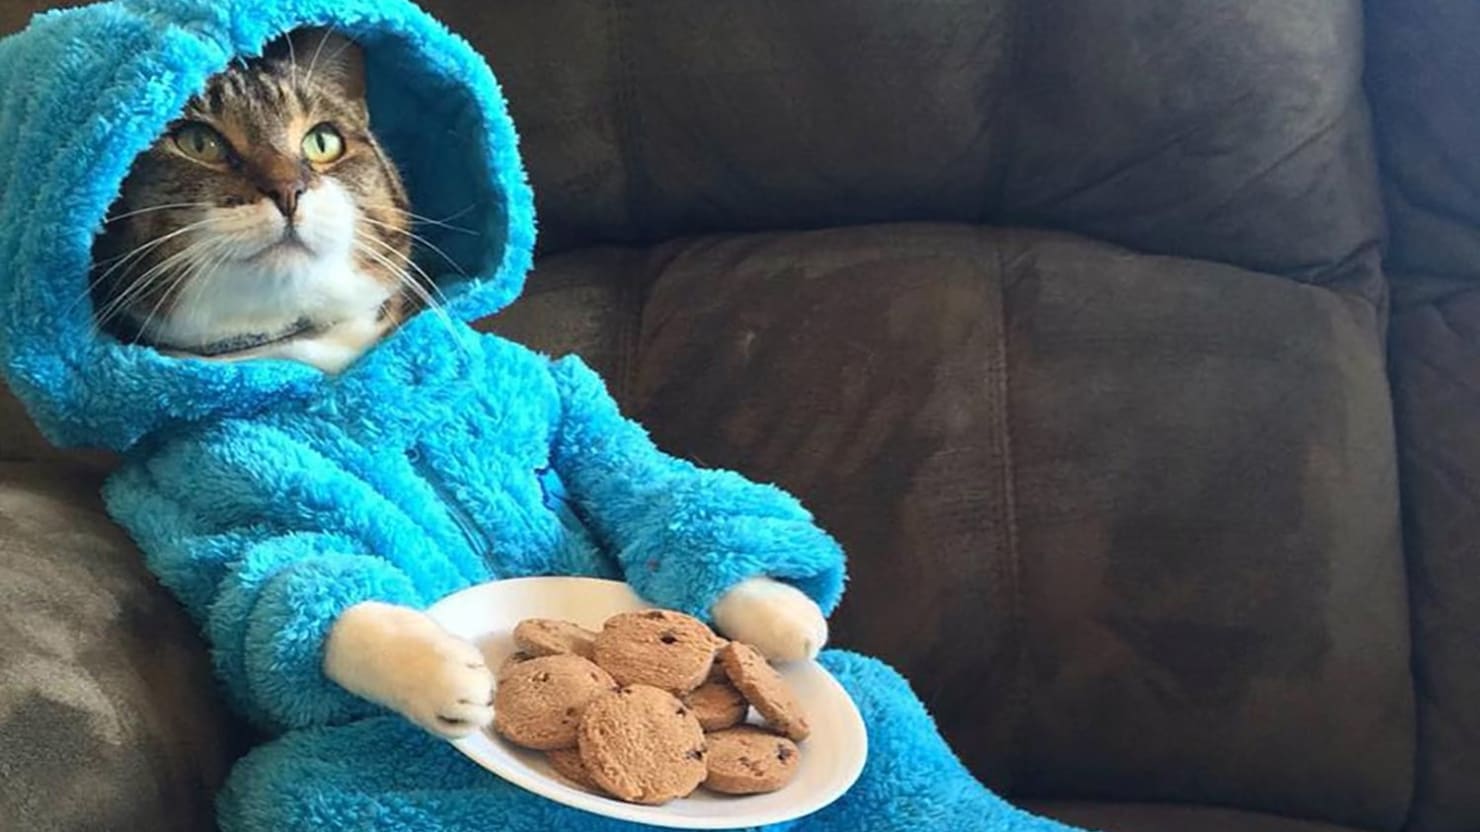 U.S. Embassy Accidentally Distributes Photo of a Cat Dressed as Cookie Monster